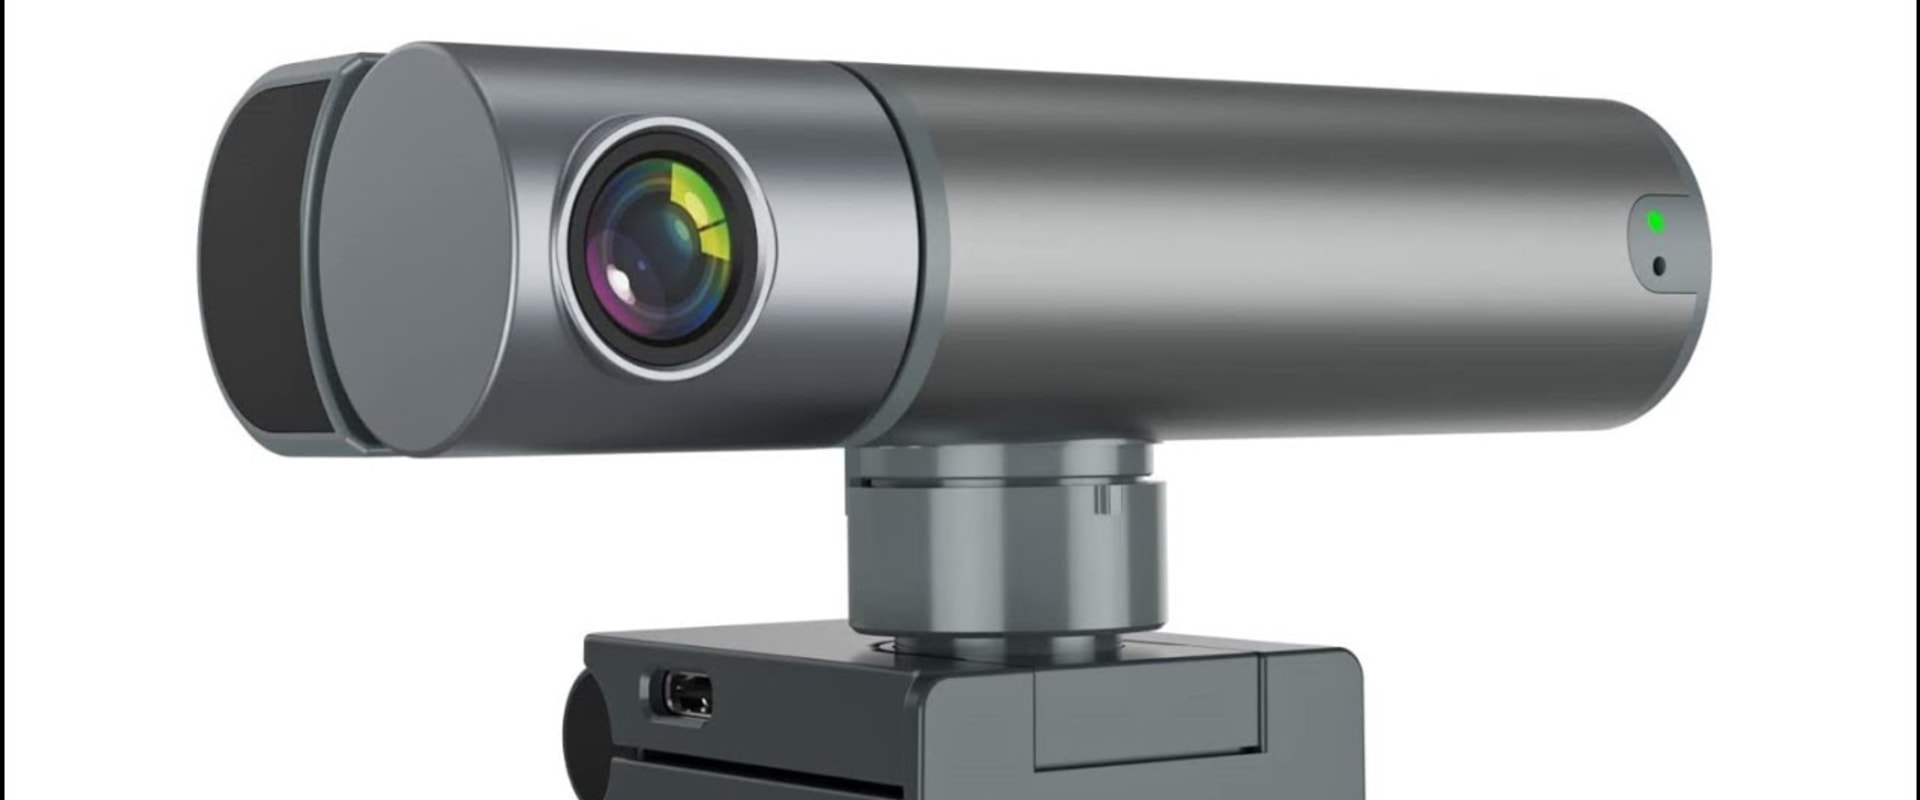 Wireless Webcams: An Overview